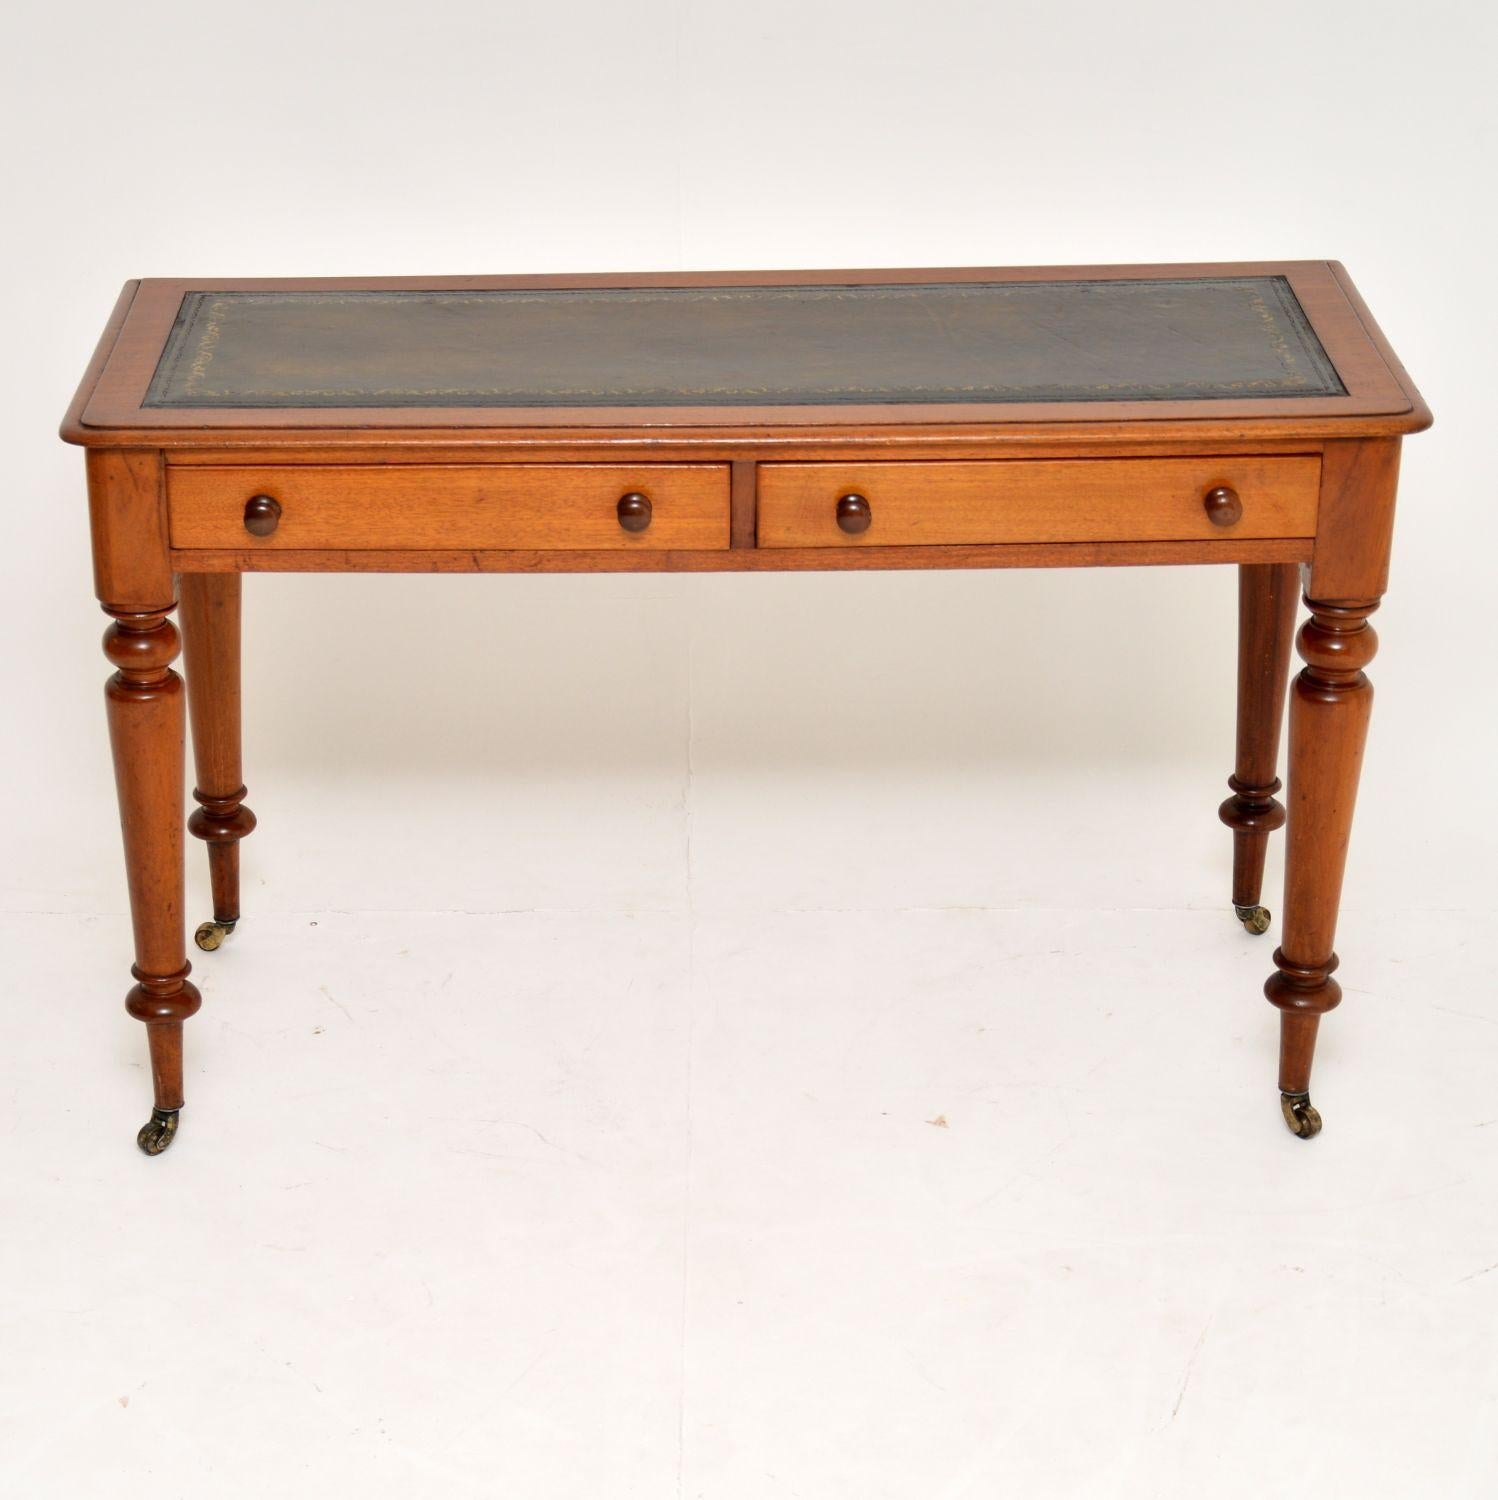 This antique Victorian mahogany writing table has slim proportions from back to front, so could well suit certain areas with limited space.

It has a tooled leather writing surface, two drawers with turned bun handles and turned legs with brass